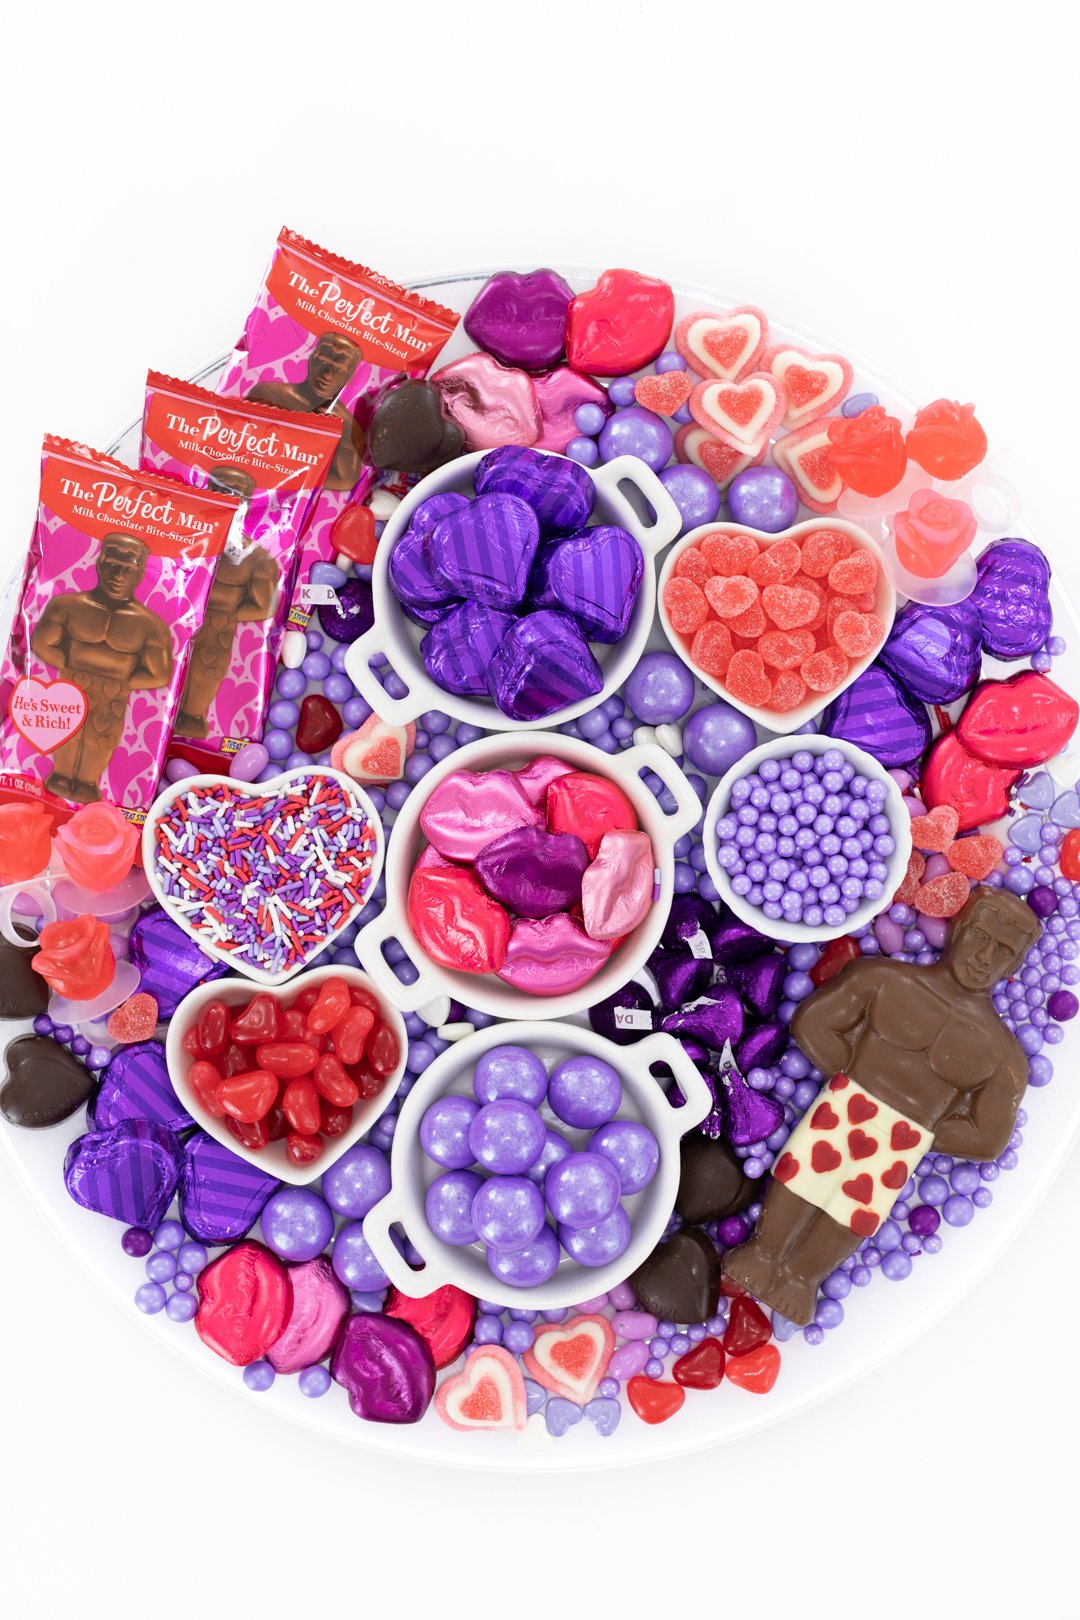 Galentine's Day Themed Candy Charcuterie Board loaded with red and purple candies.